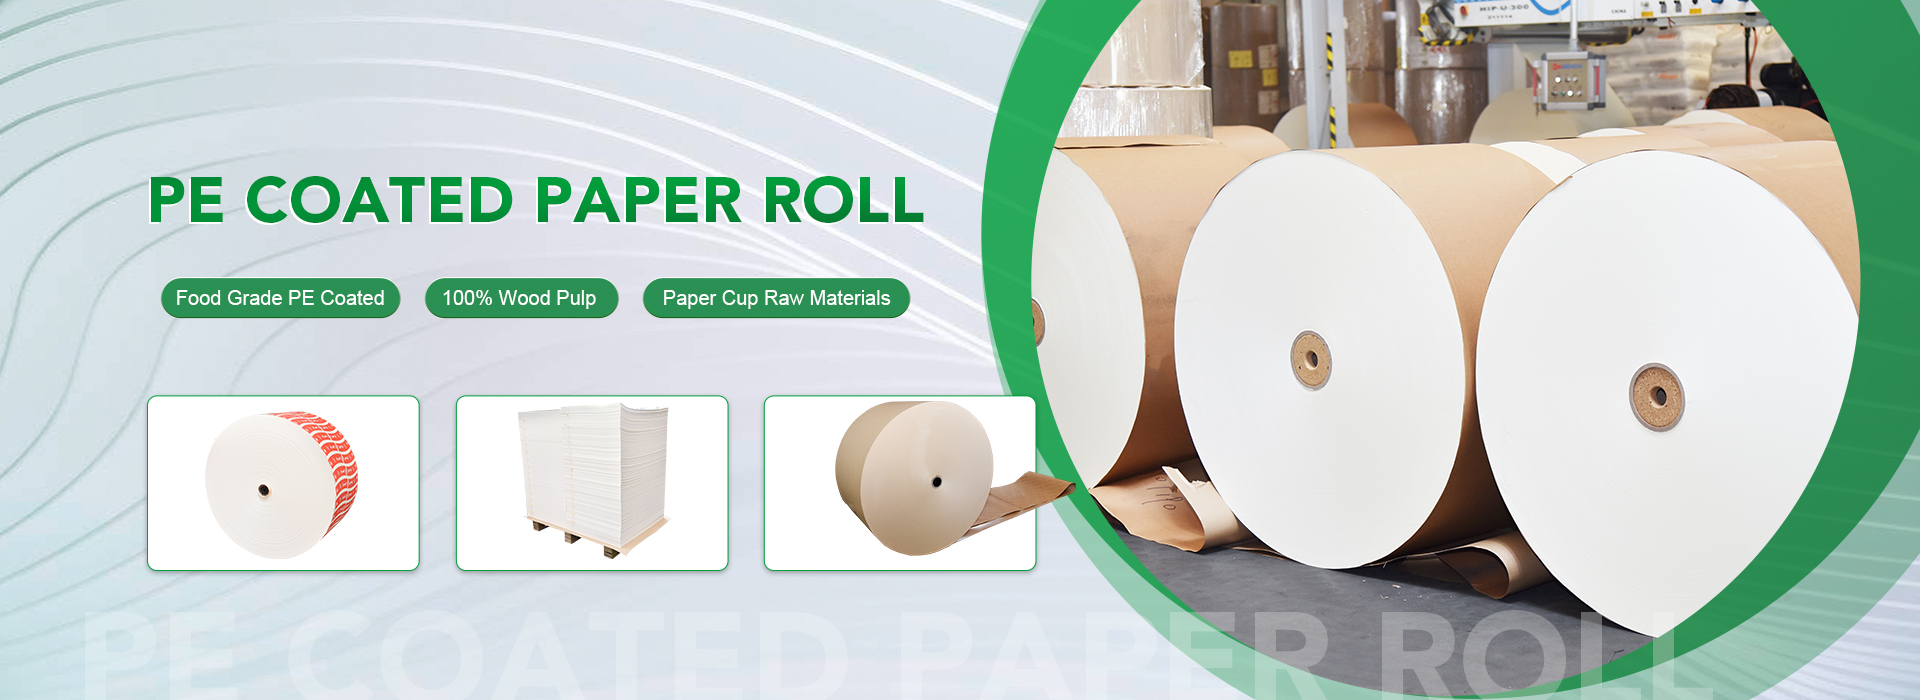 PE coated paper roll paper cup raw material - paperjoy banner